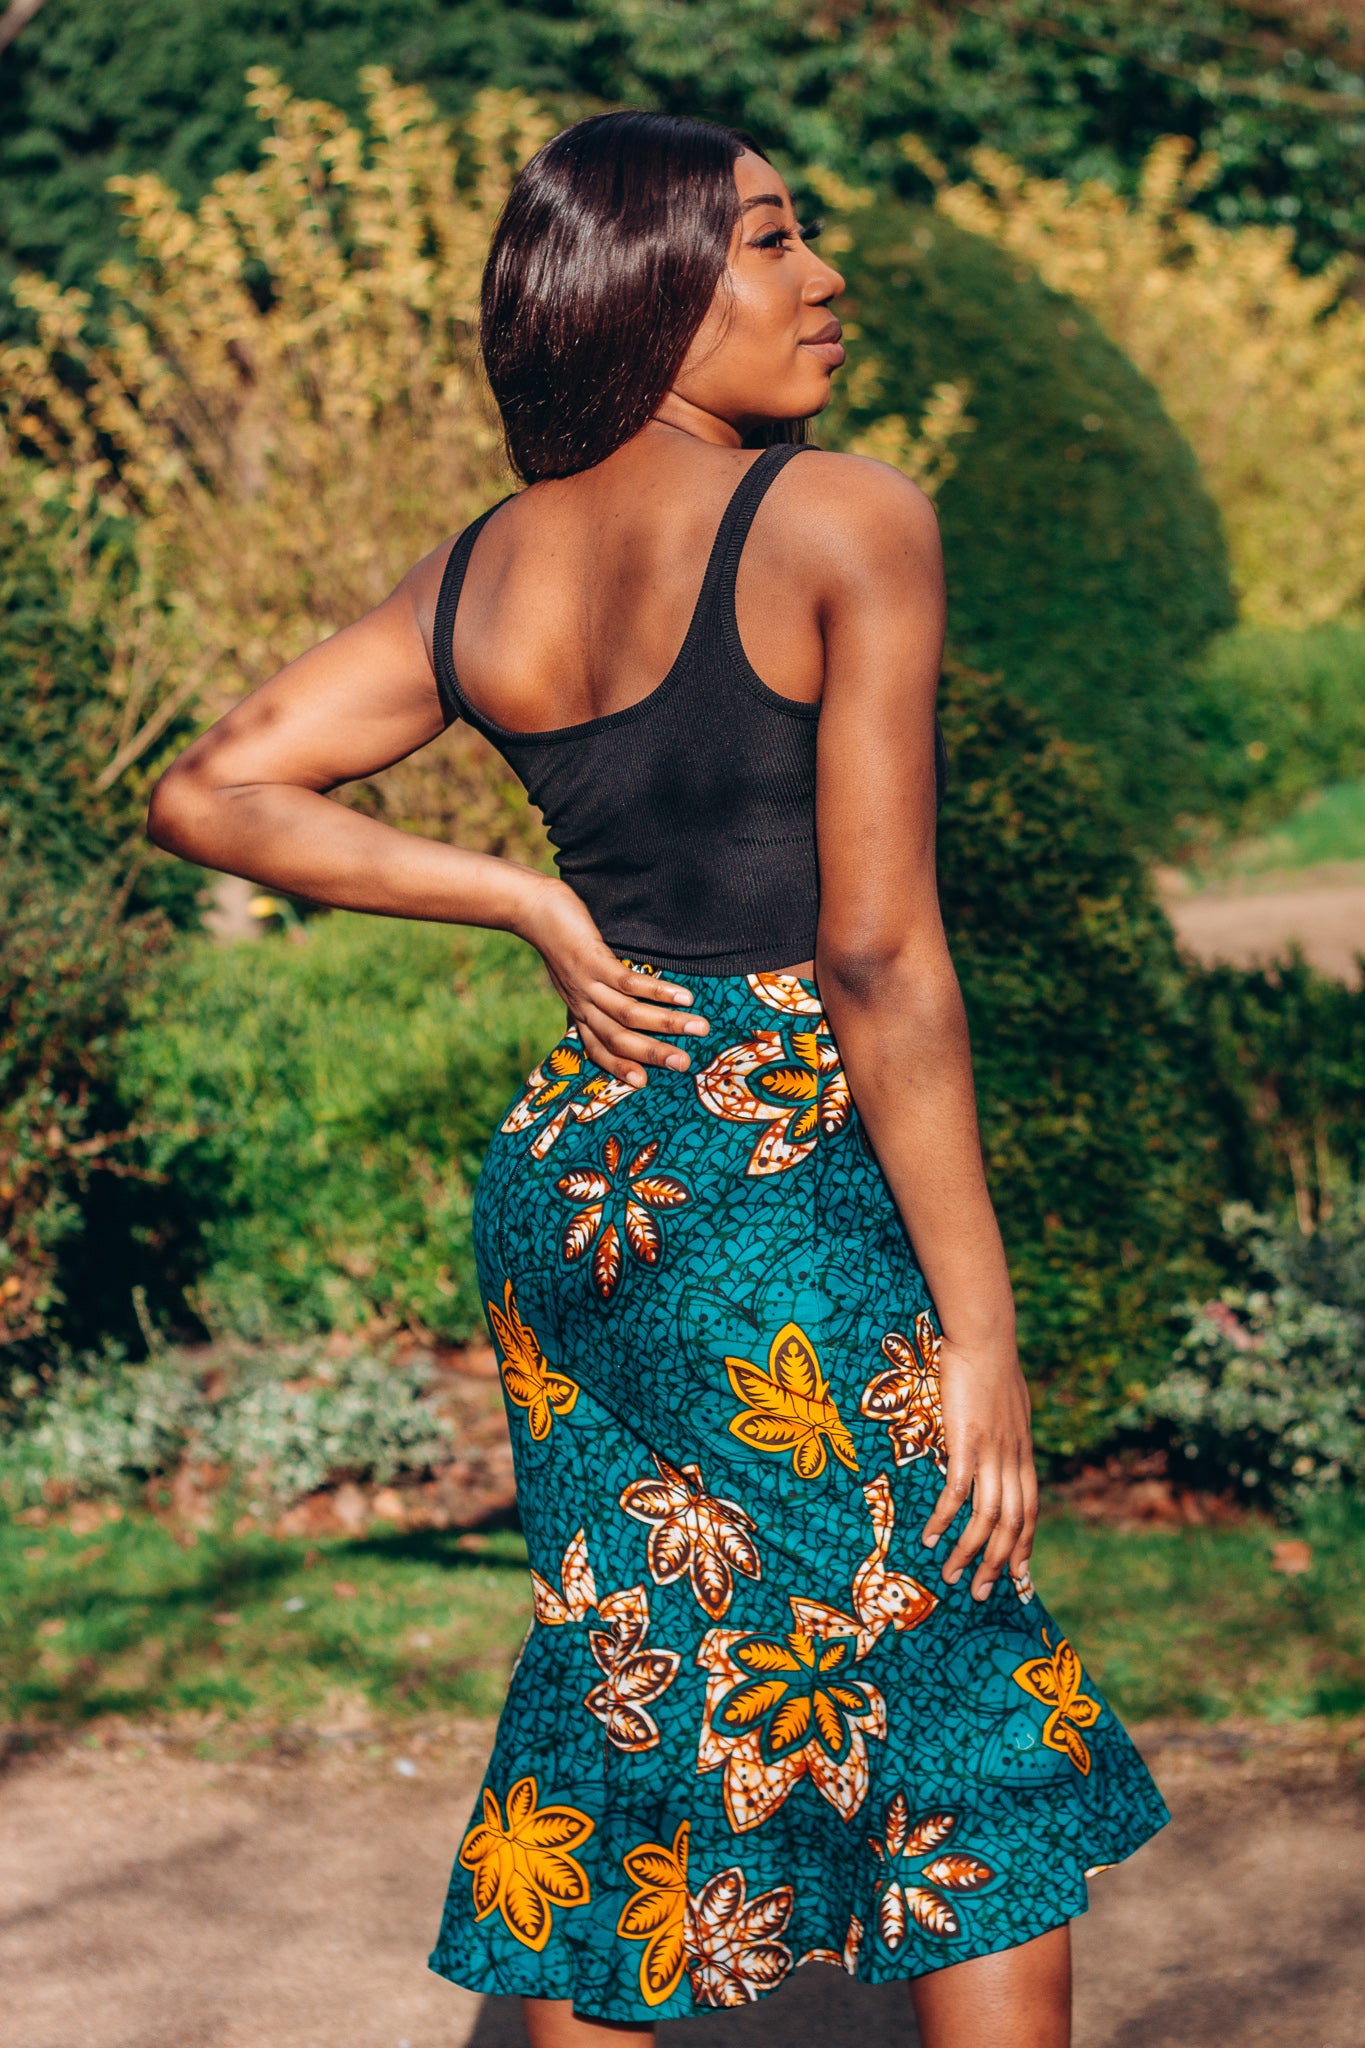 Orange, yellow, white and green African print High Waisted knee length Flared fishtail Skirt with seamed belt detailing in a floral pattern, made from sustainably sourced Ankara wax print.